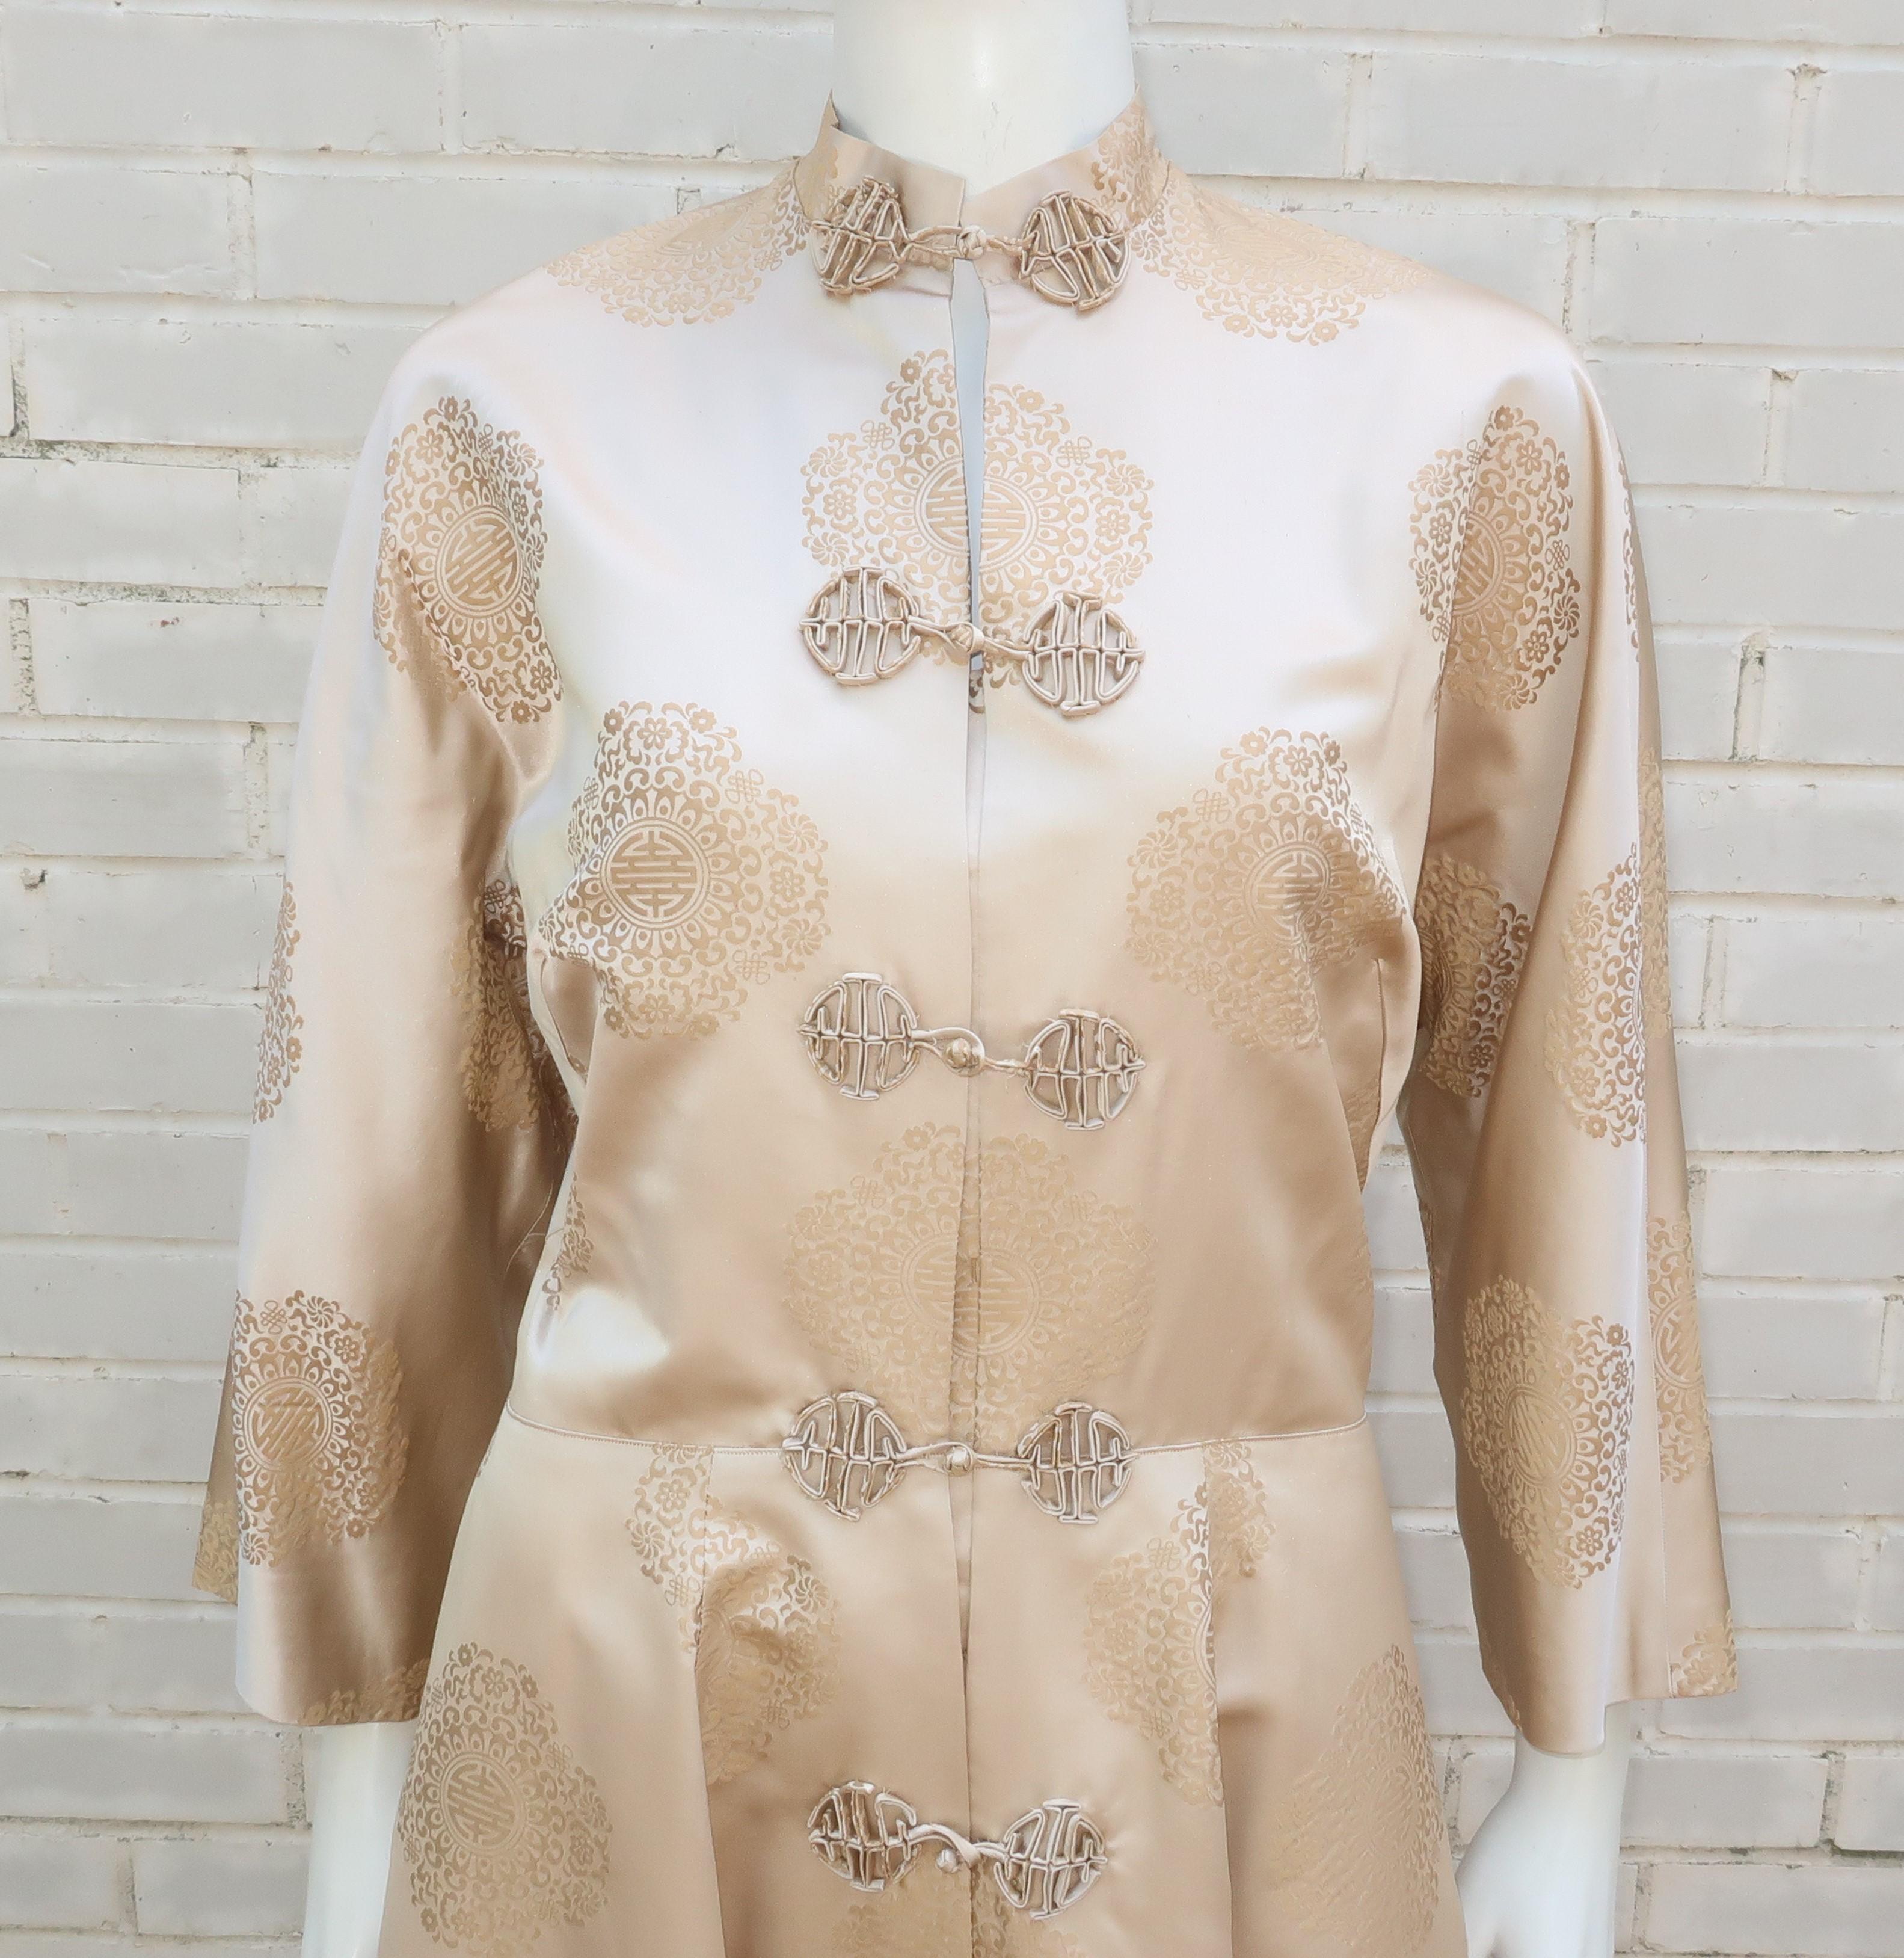 1950's champagne silk jacquard coat with an Asian motif accented by a mandarin style silhouette, beautiful pattern and frog closures.  The coat is fully lined and can be worn as a dress, hostess robe or outerwear.  It was created by Dynasty, a Hong